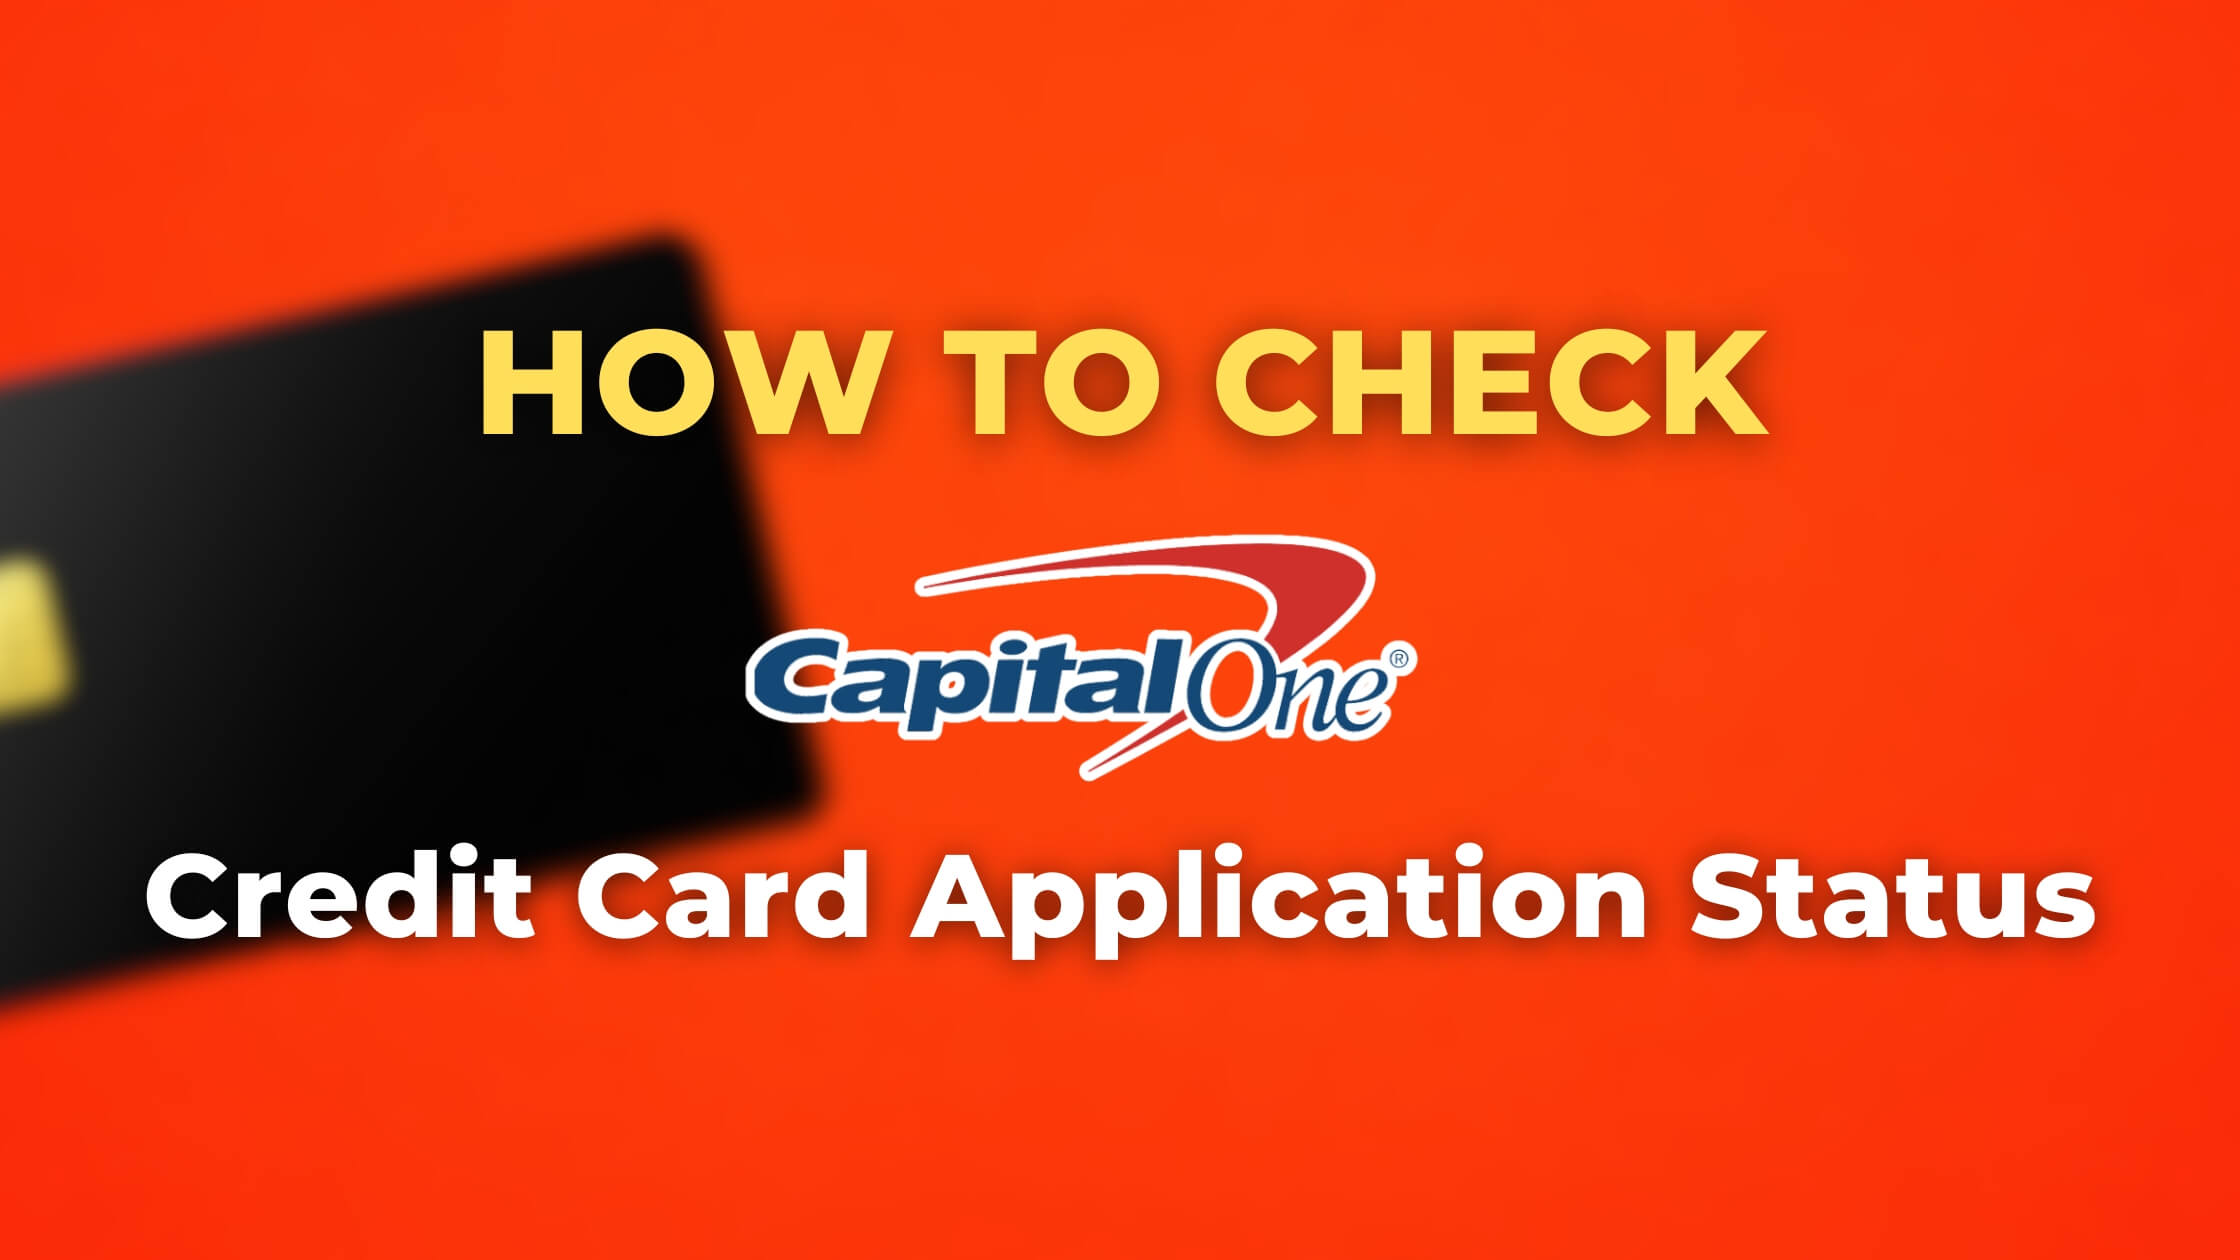 How to Check Capital One Credit Card Application Status